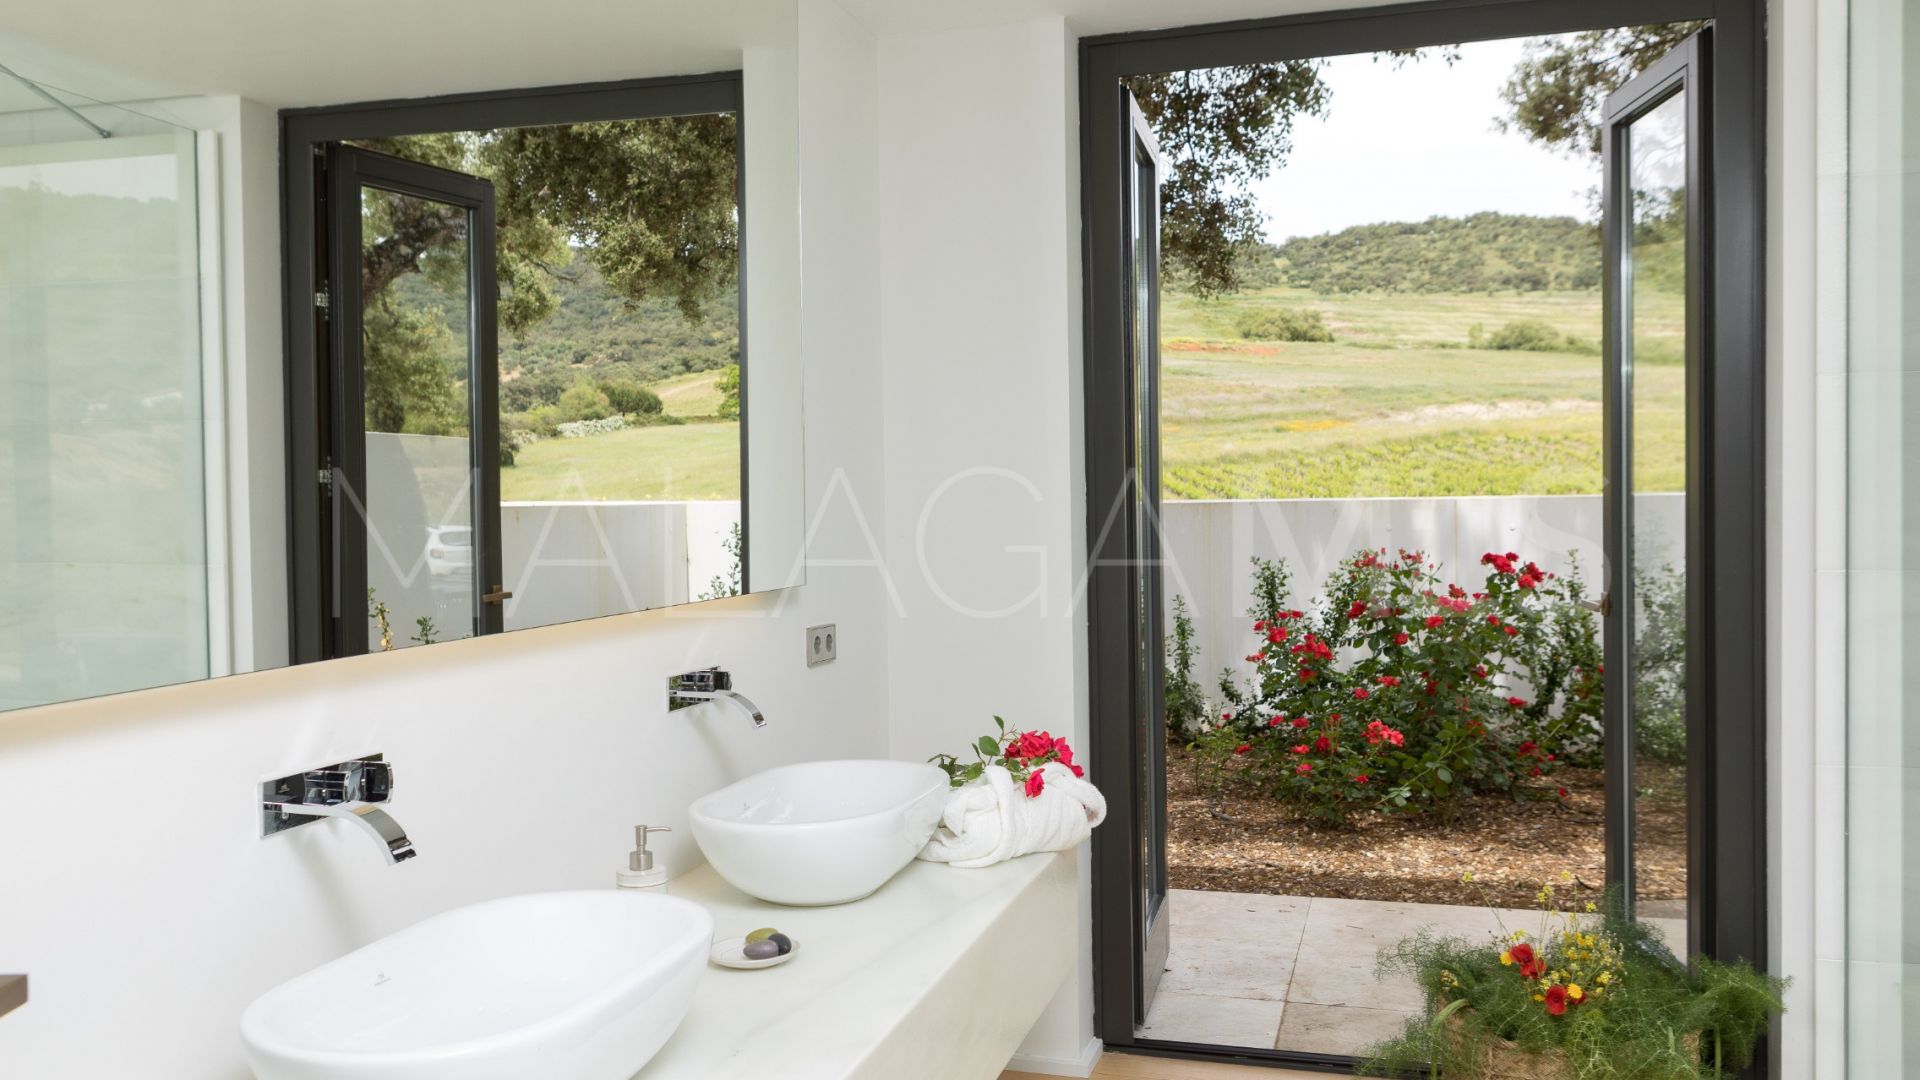 Villa for sale in Ronda with 4 bedrooms